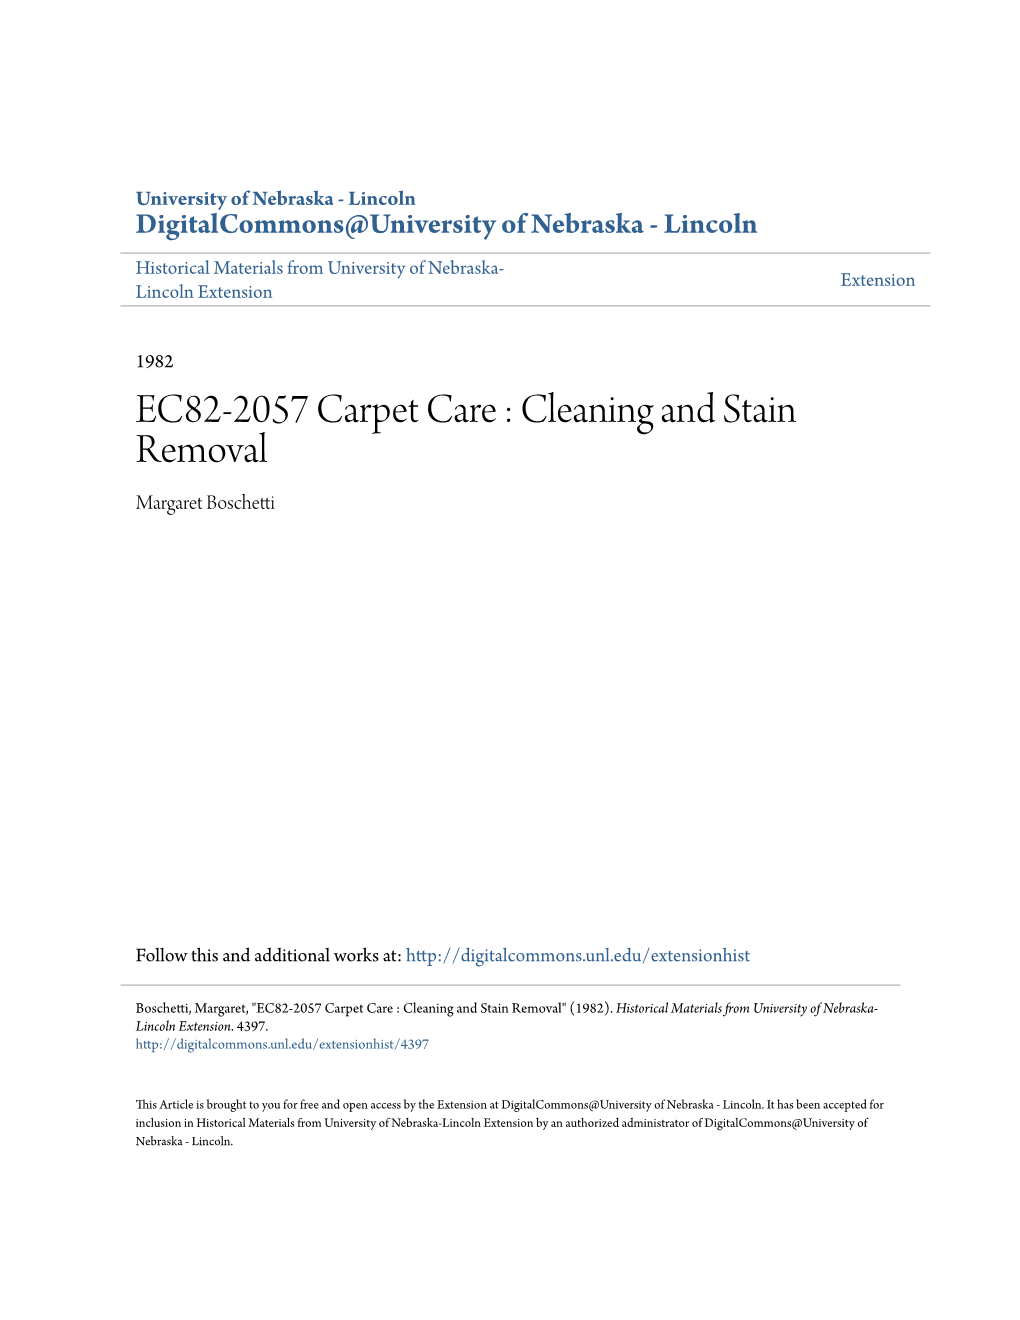 EC82-2057 Carpet Care : Cleaning and Stain Removal Margaret Boschetti